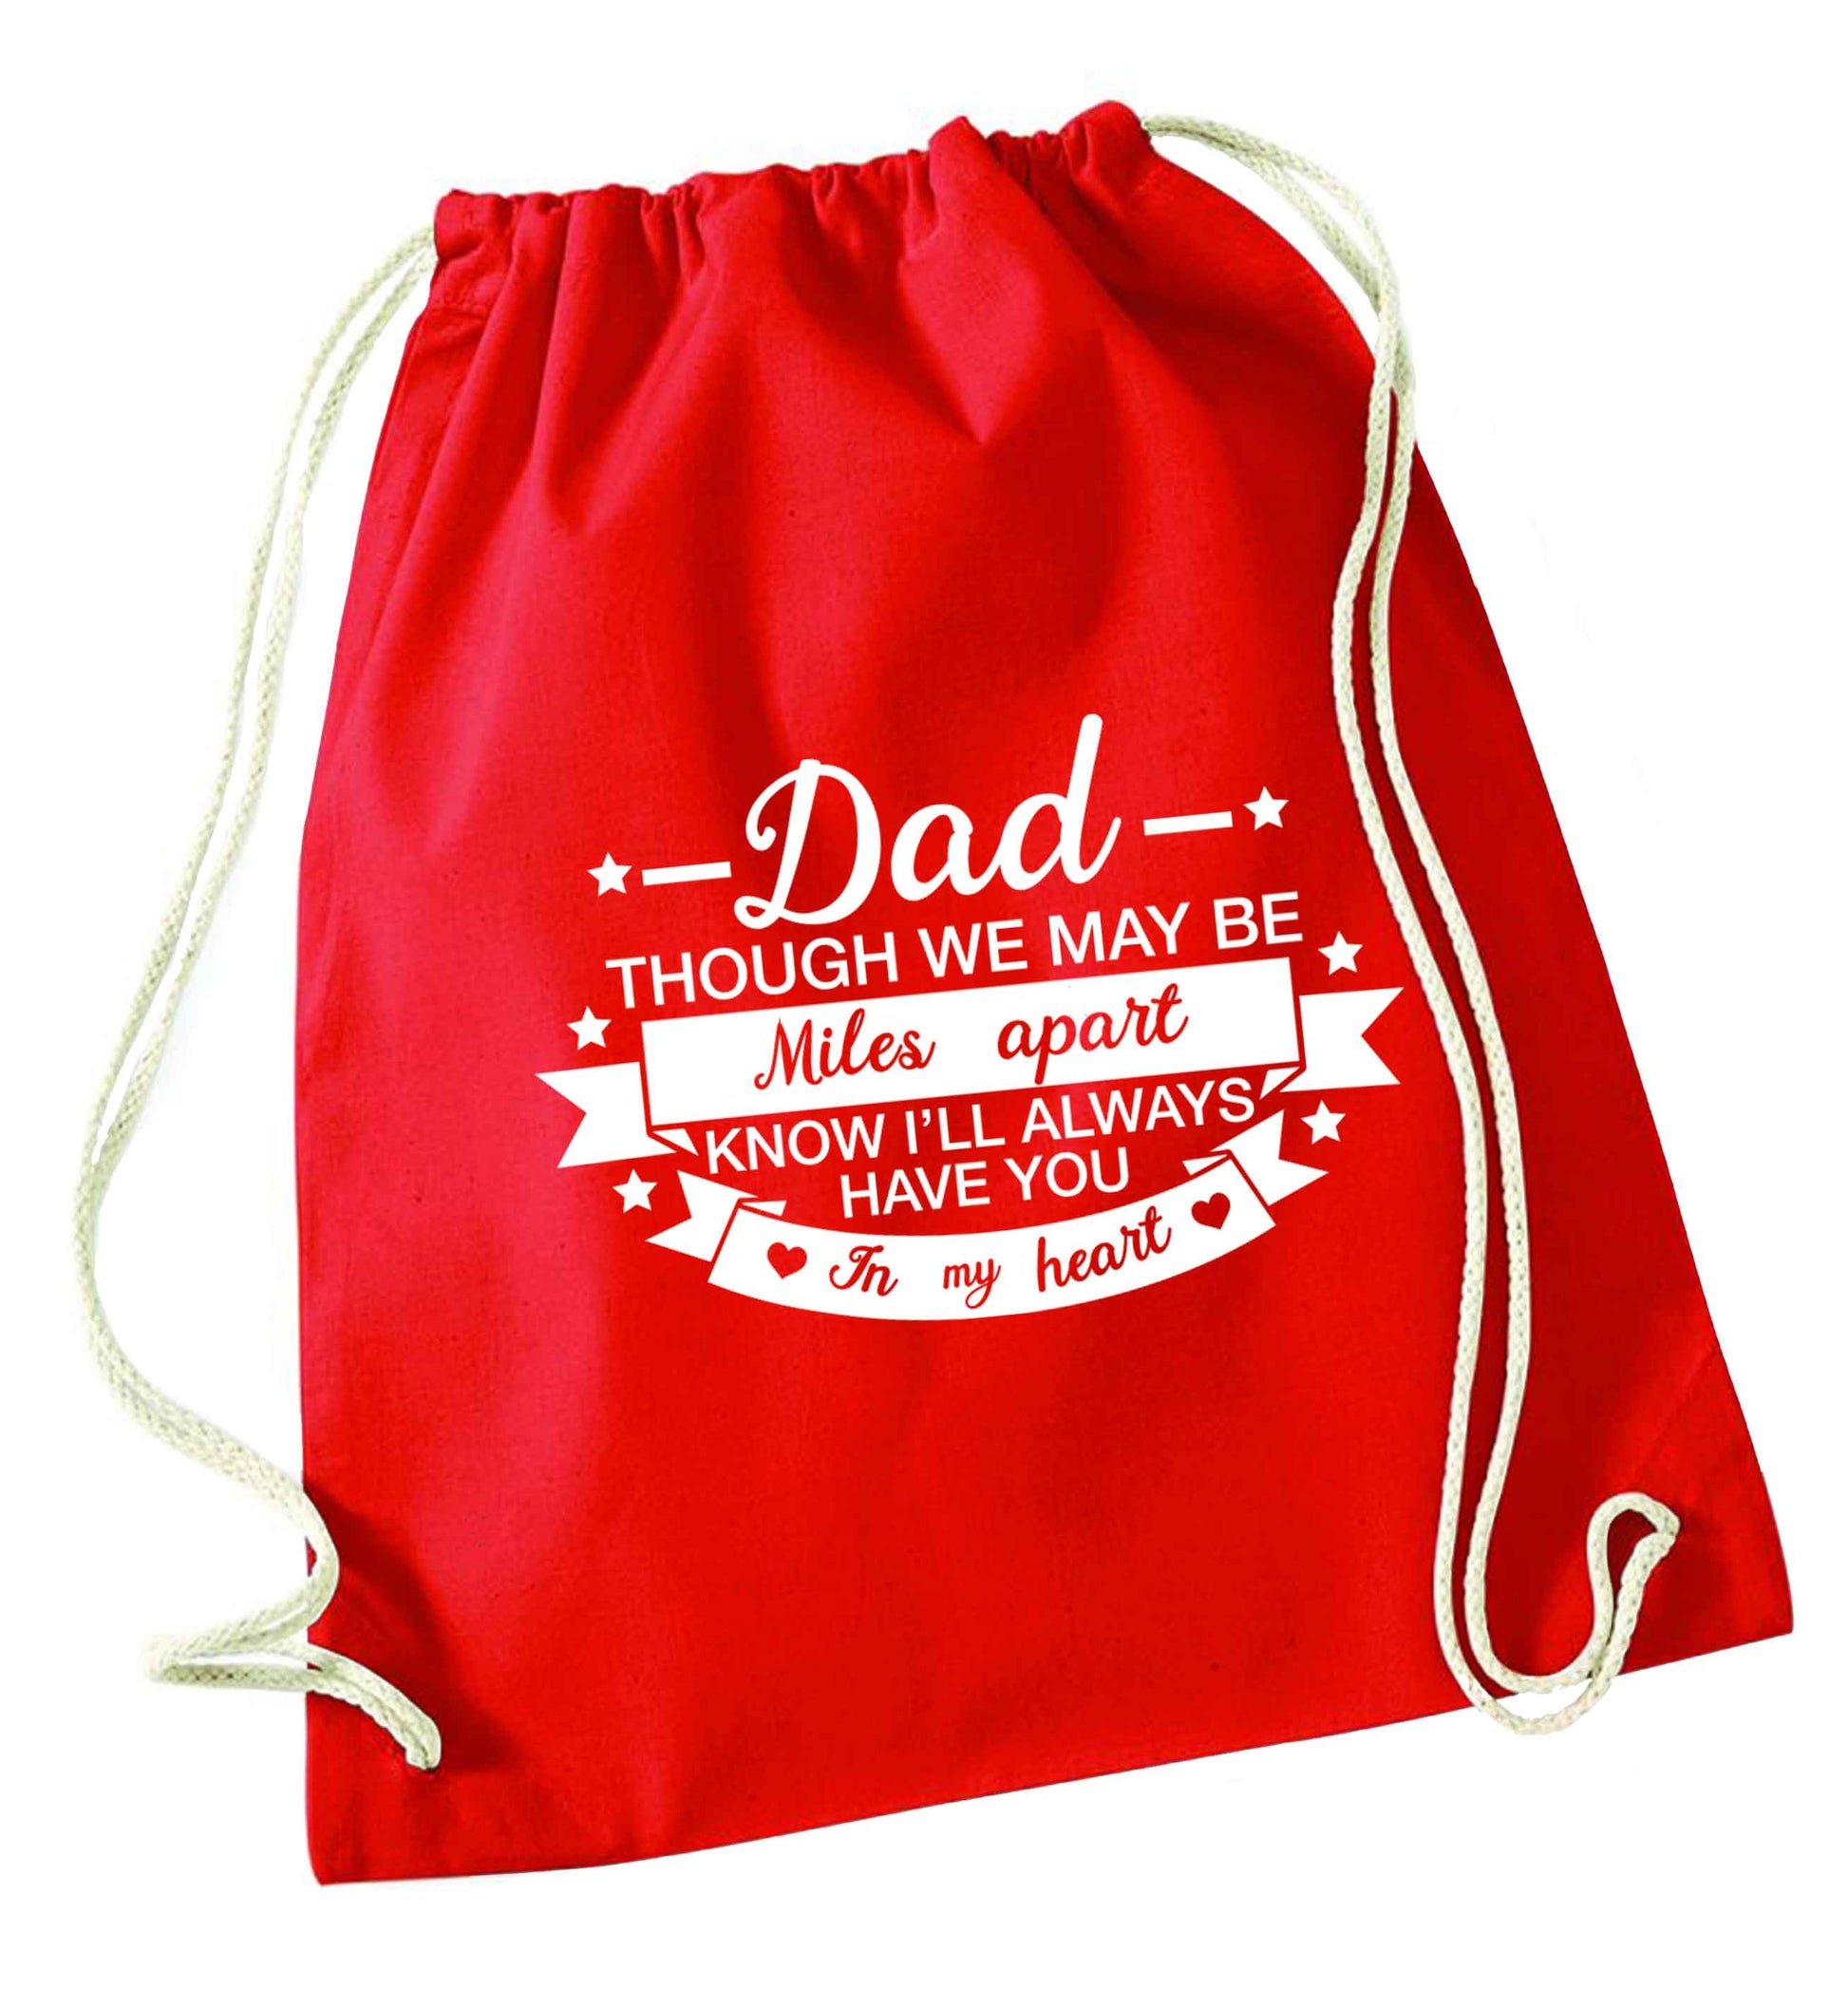 Dad though we are miles apart know I'll always have you in my heart red drawstring bag 